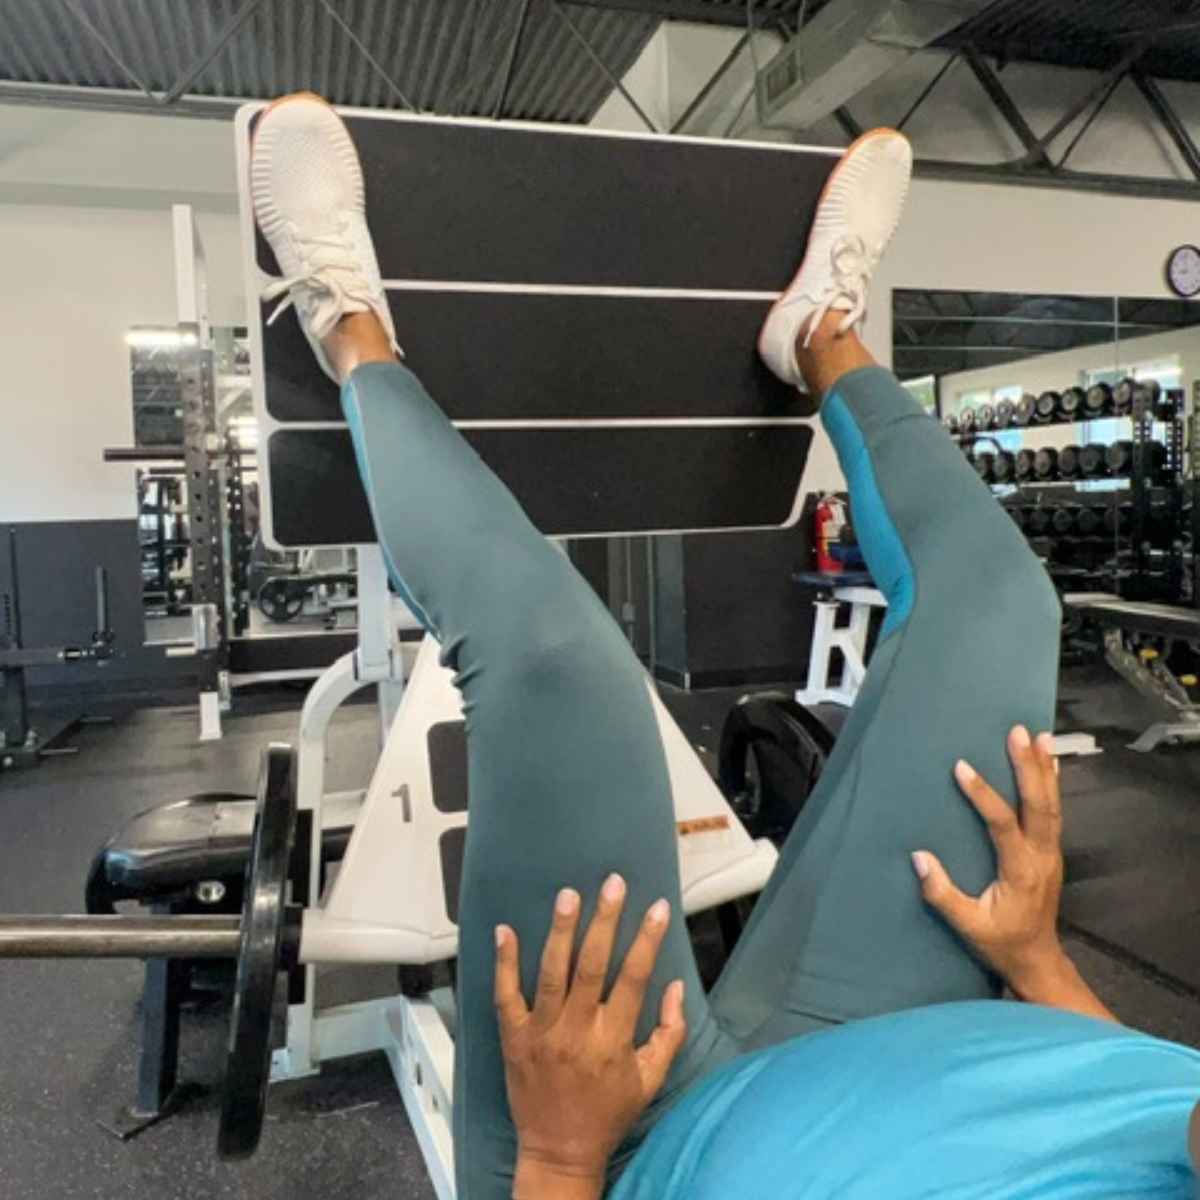 What’s the best foot placement for leg press?